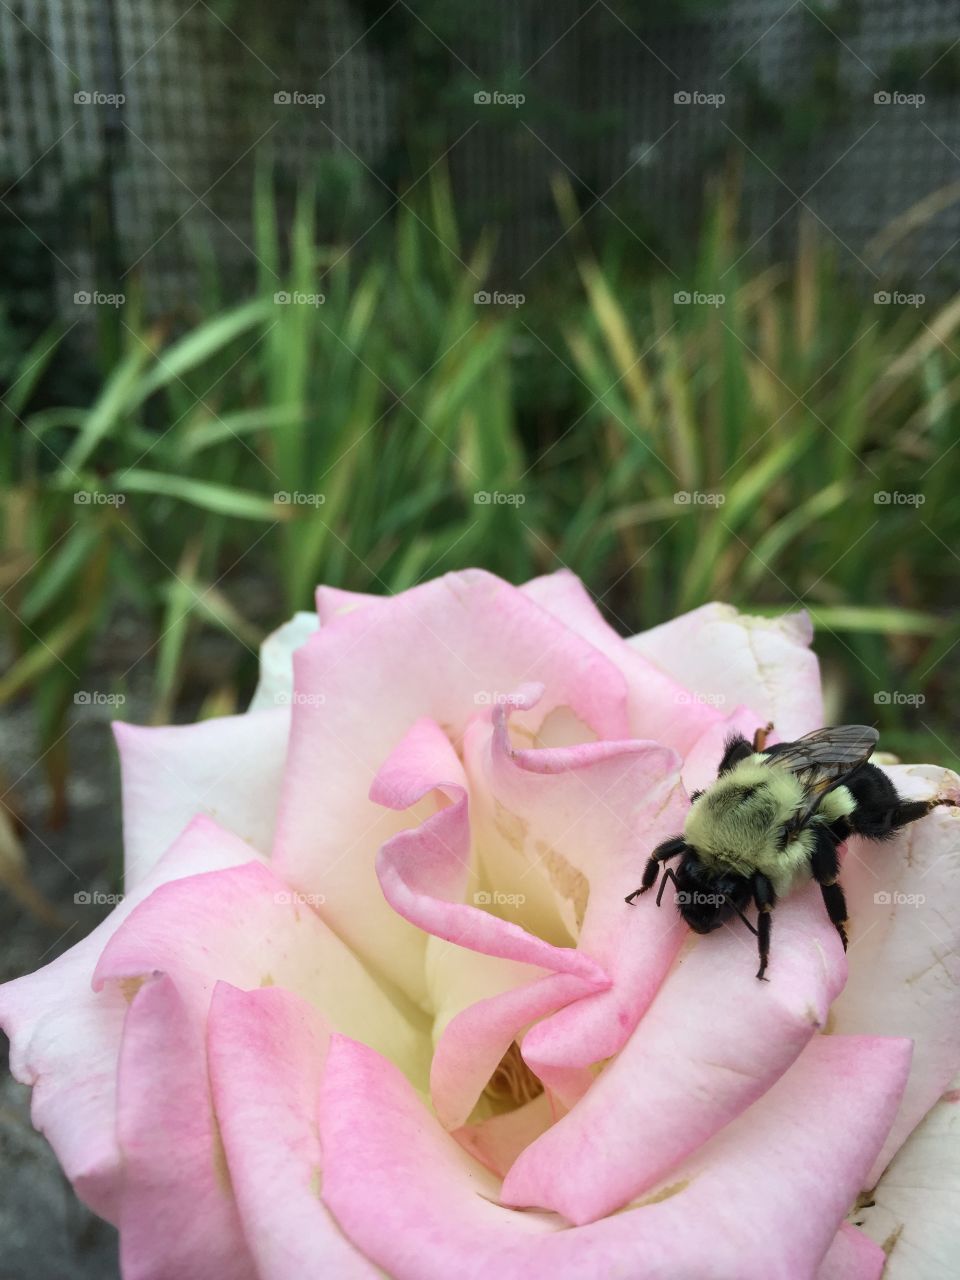 A fuzzy bumble bee on a beautiful pink rose.